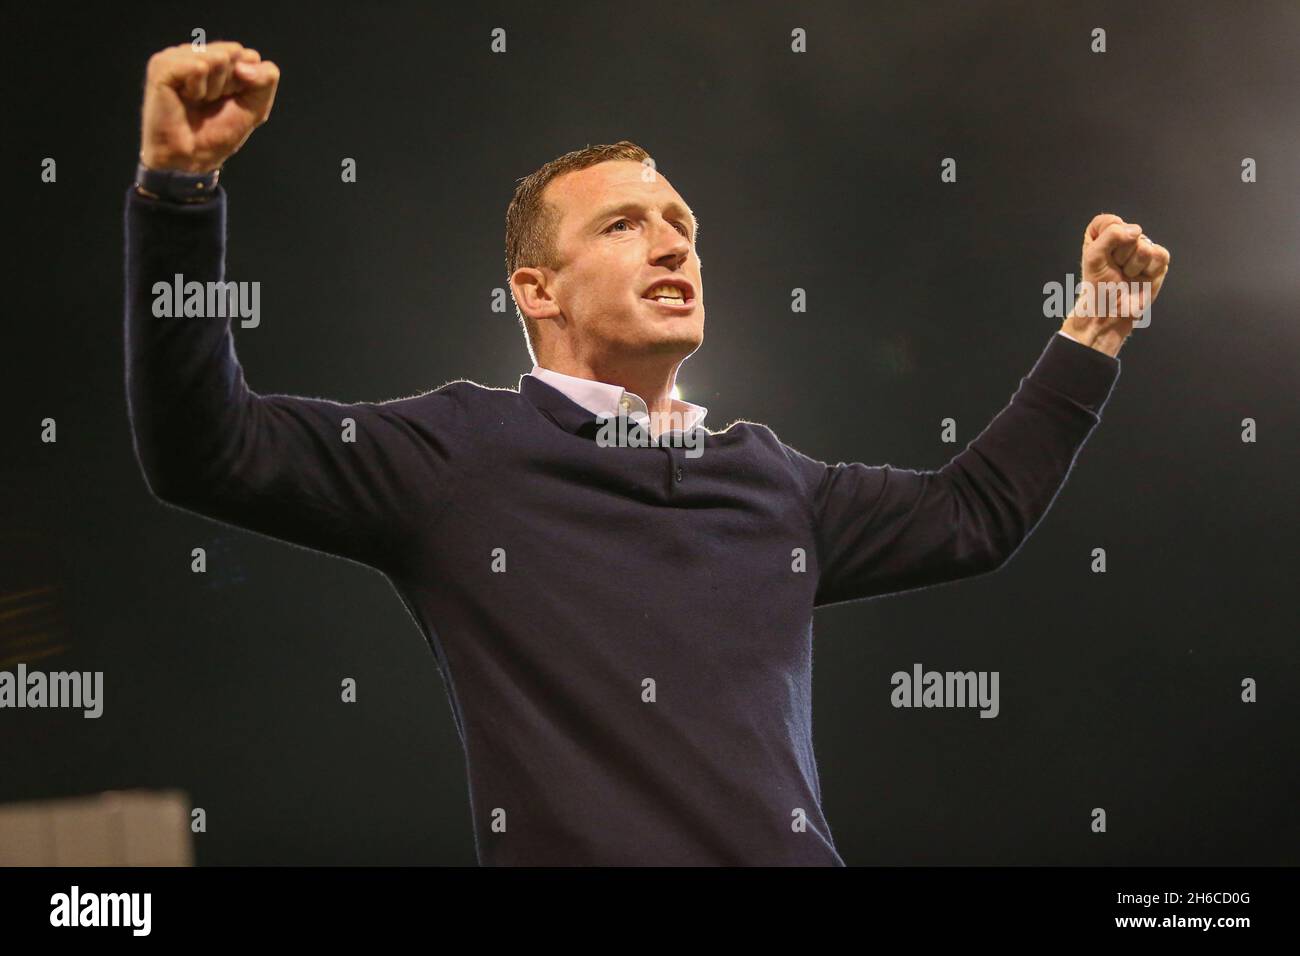 St. Petersburg, FL USA;  Tampa Bay Rowdies head coach Neill Collins shows his excitement at the win and advancing to the Eastern Conference Finals aft Stock Photo